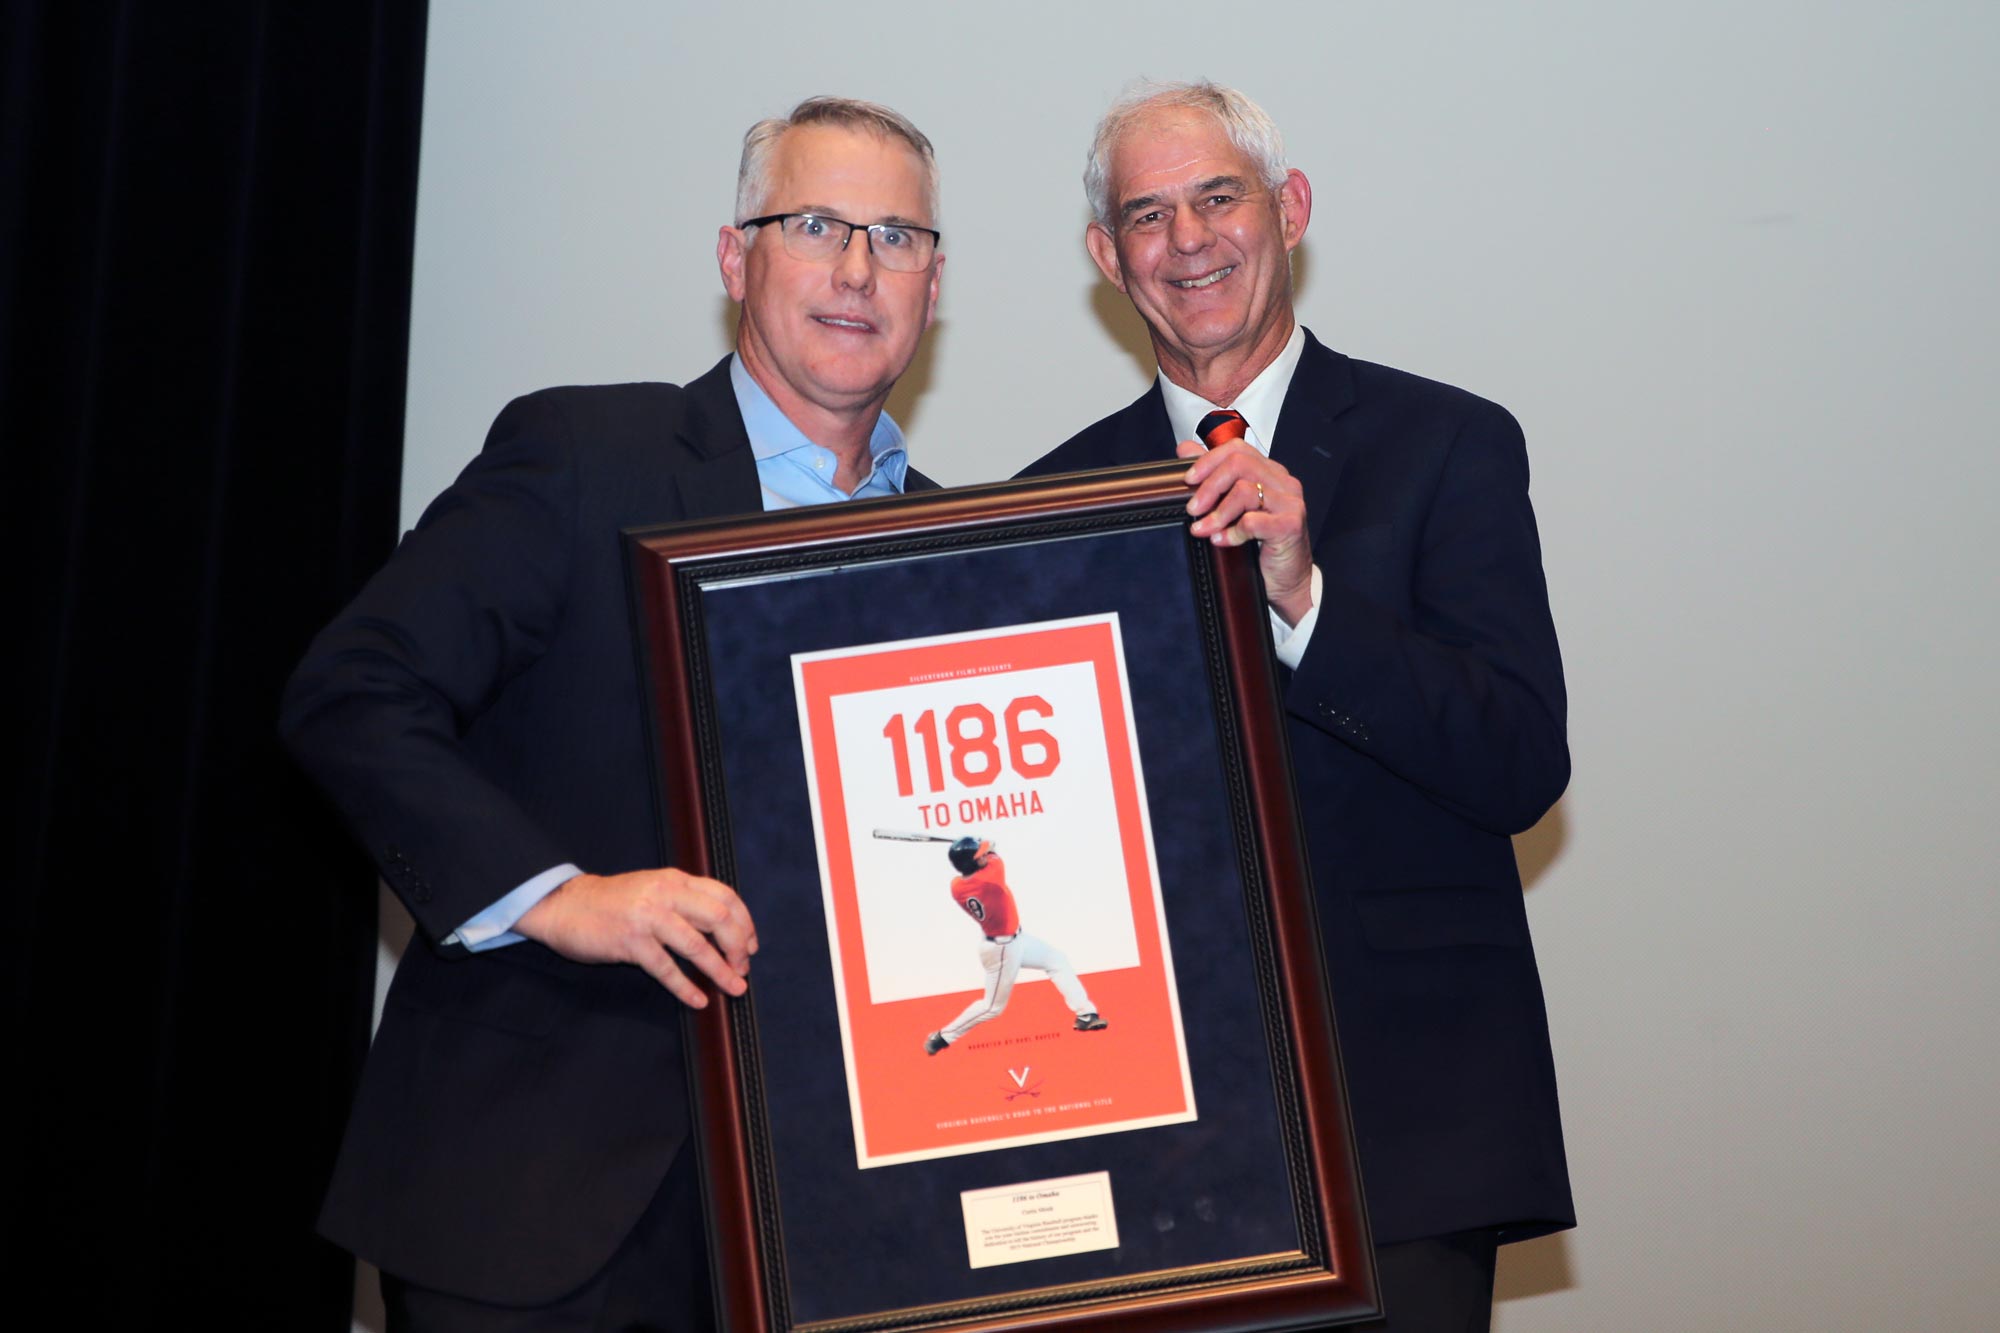 Brian O’Connor, left, presents Curtis Monk, right, with a framed movie poster that reads 1186 to Omaha